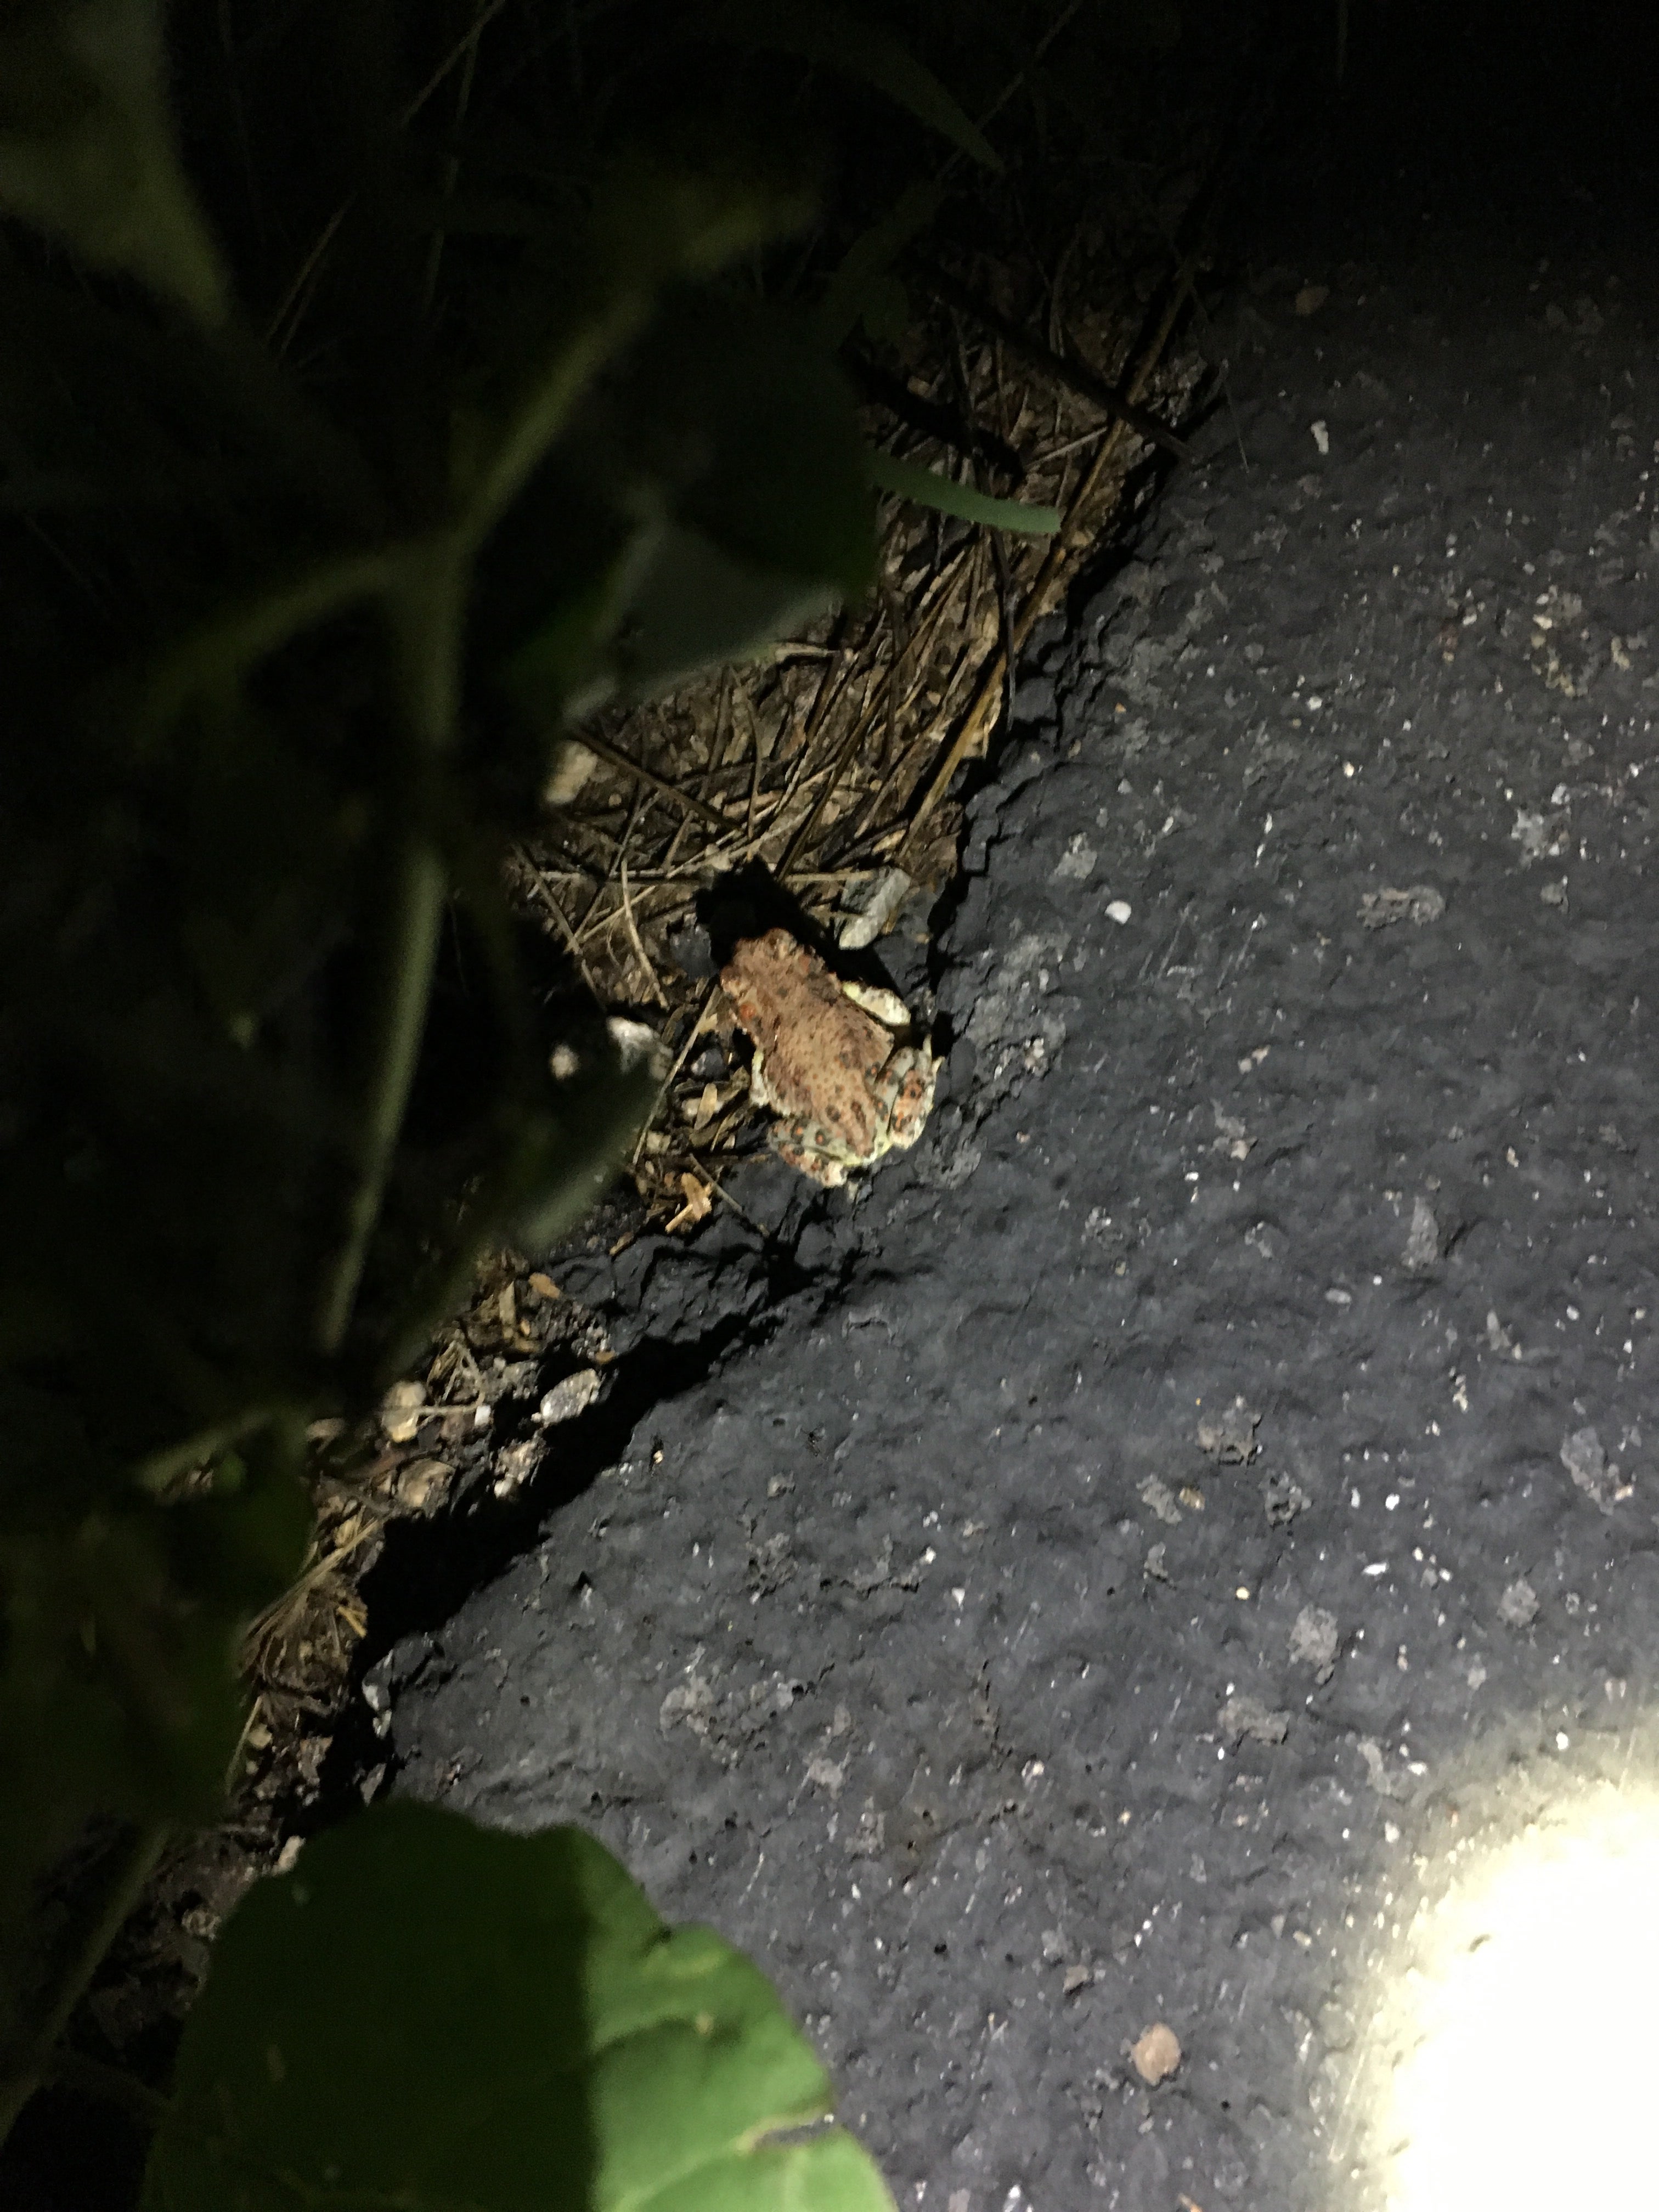 Red spotted toad on trail at night